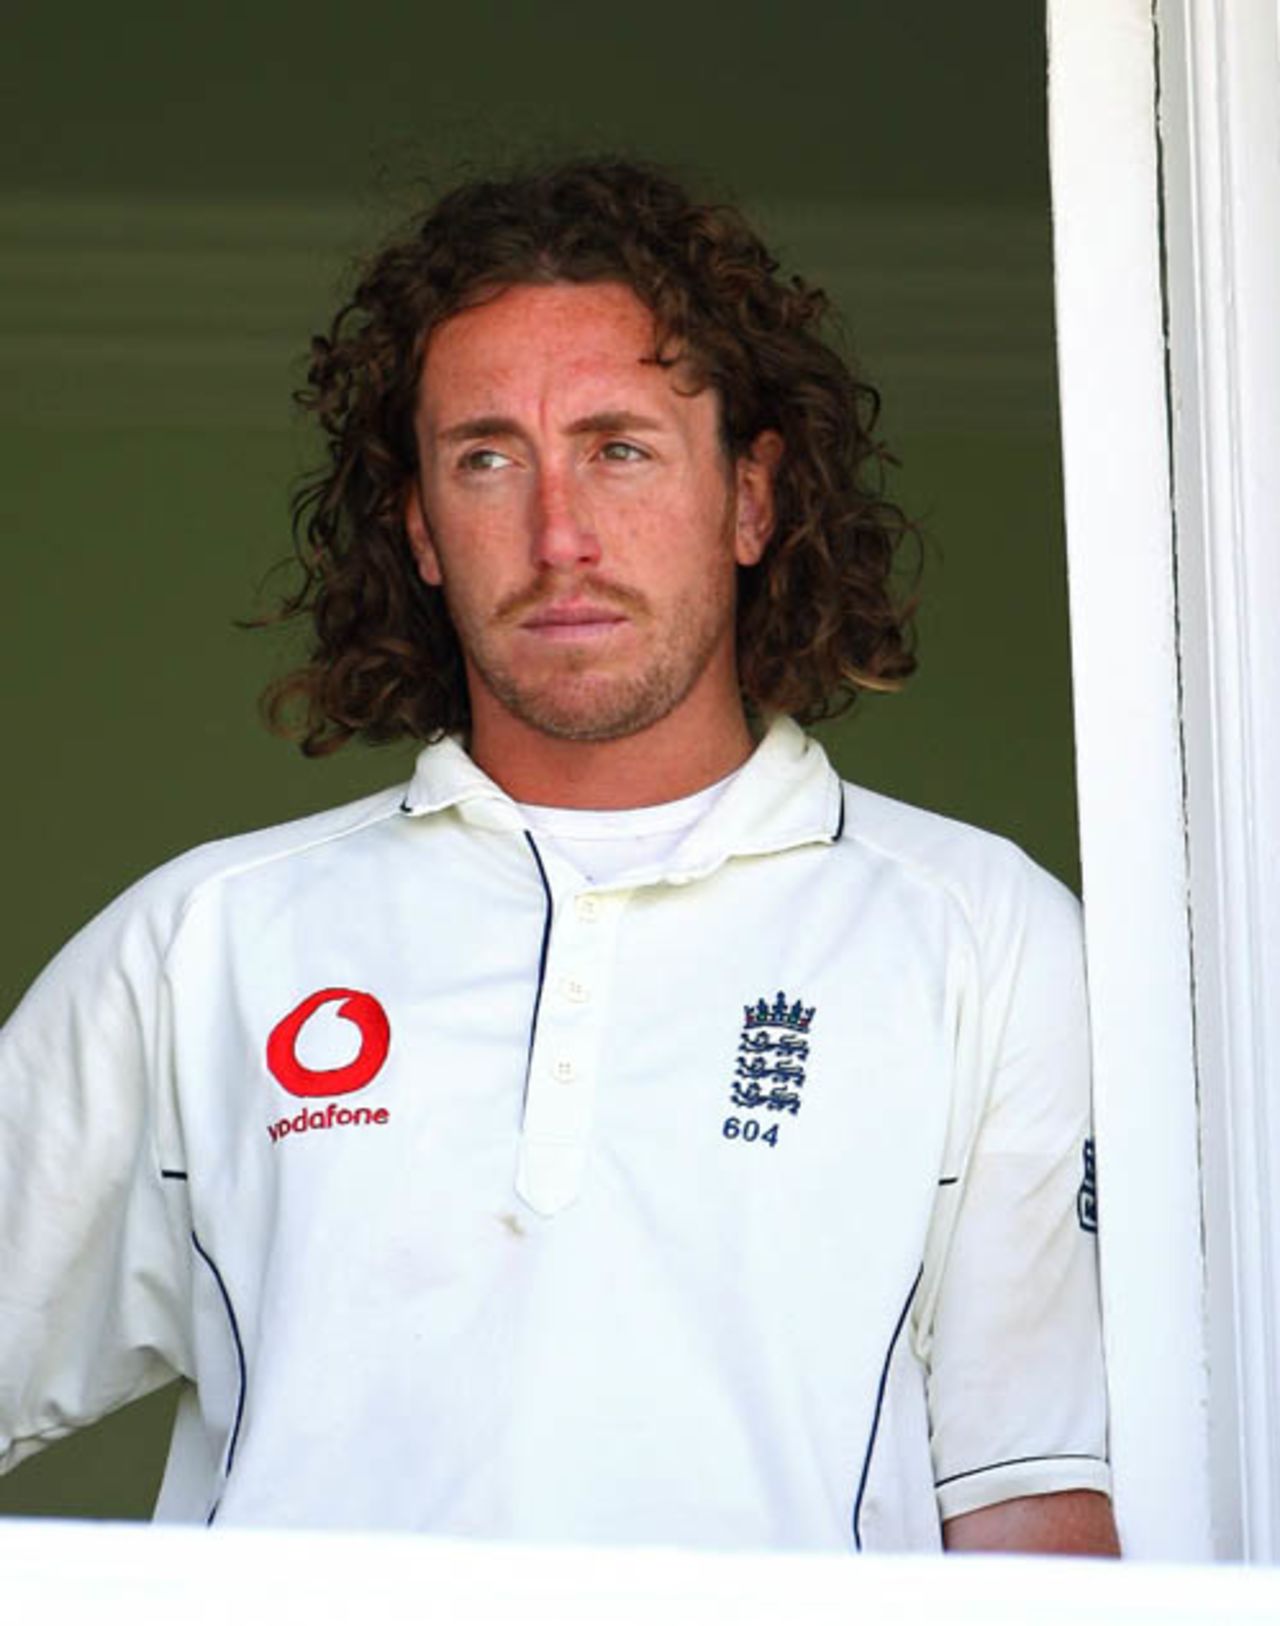 Ryan Sidebottom is a dejected man after England's seven-wicket loss to India, England v India, 2nd Test, Trent Bridge, 5th day, July 31, 2007